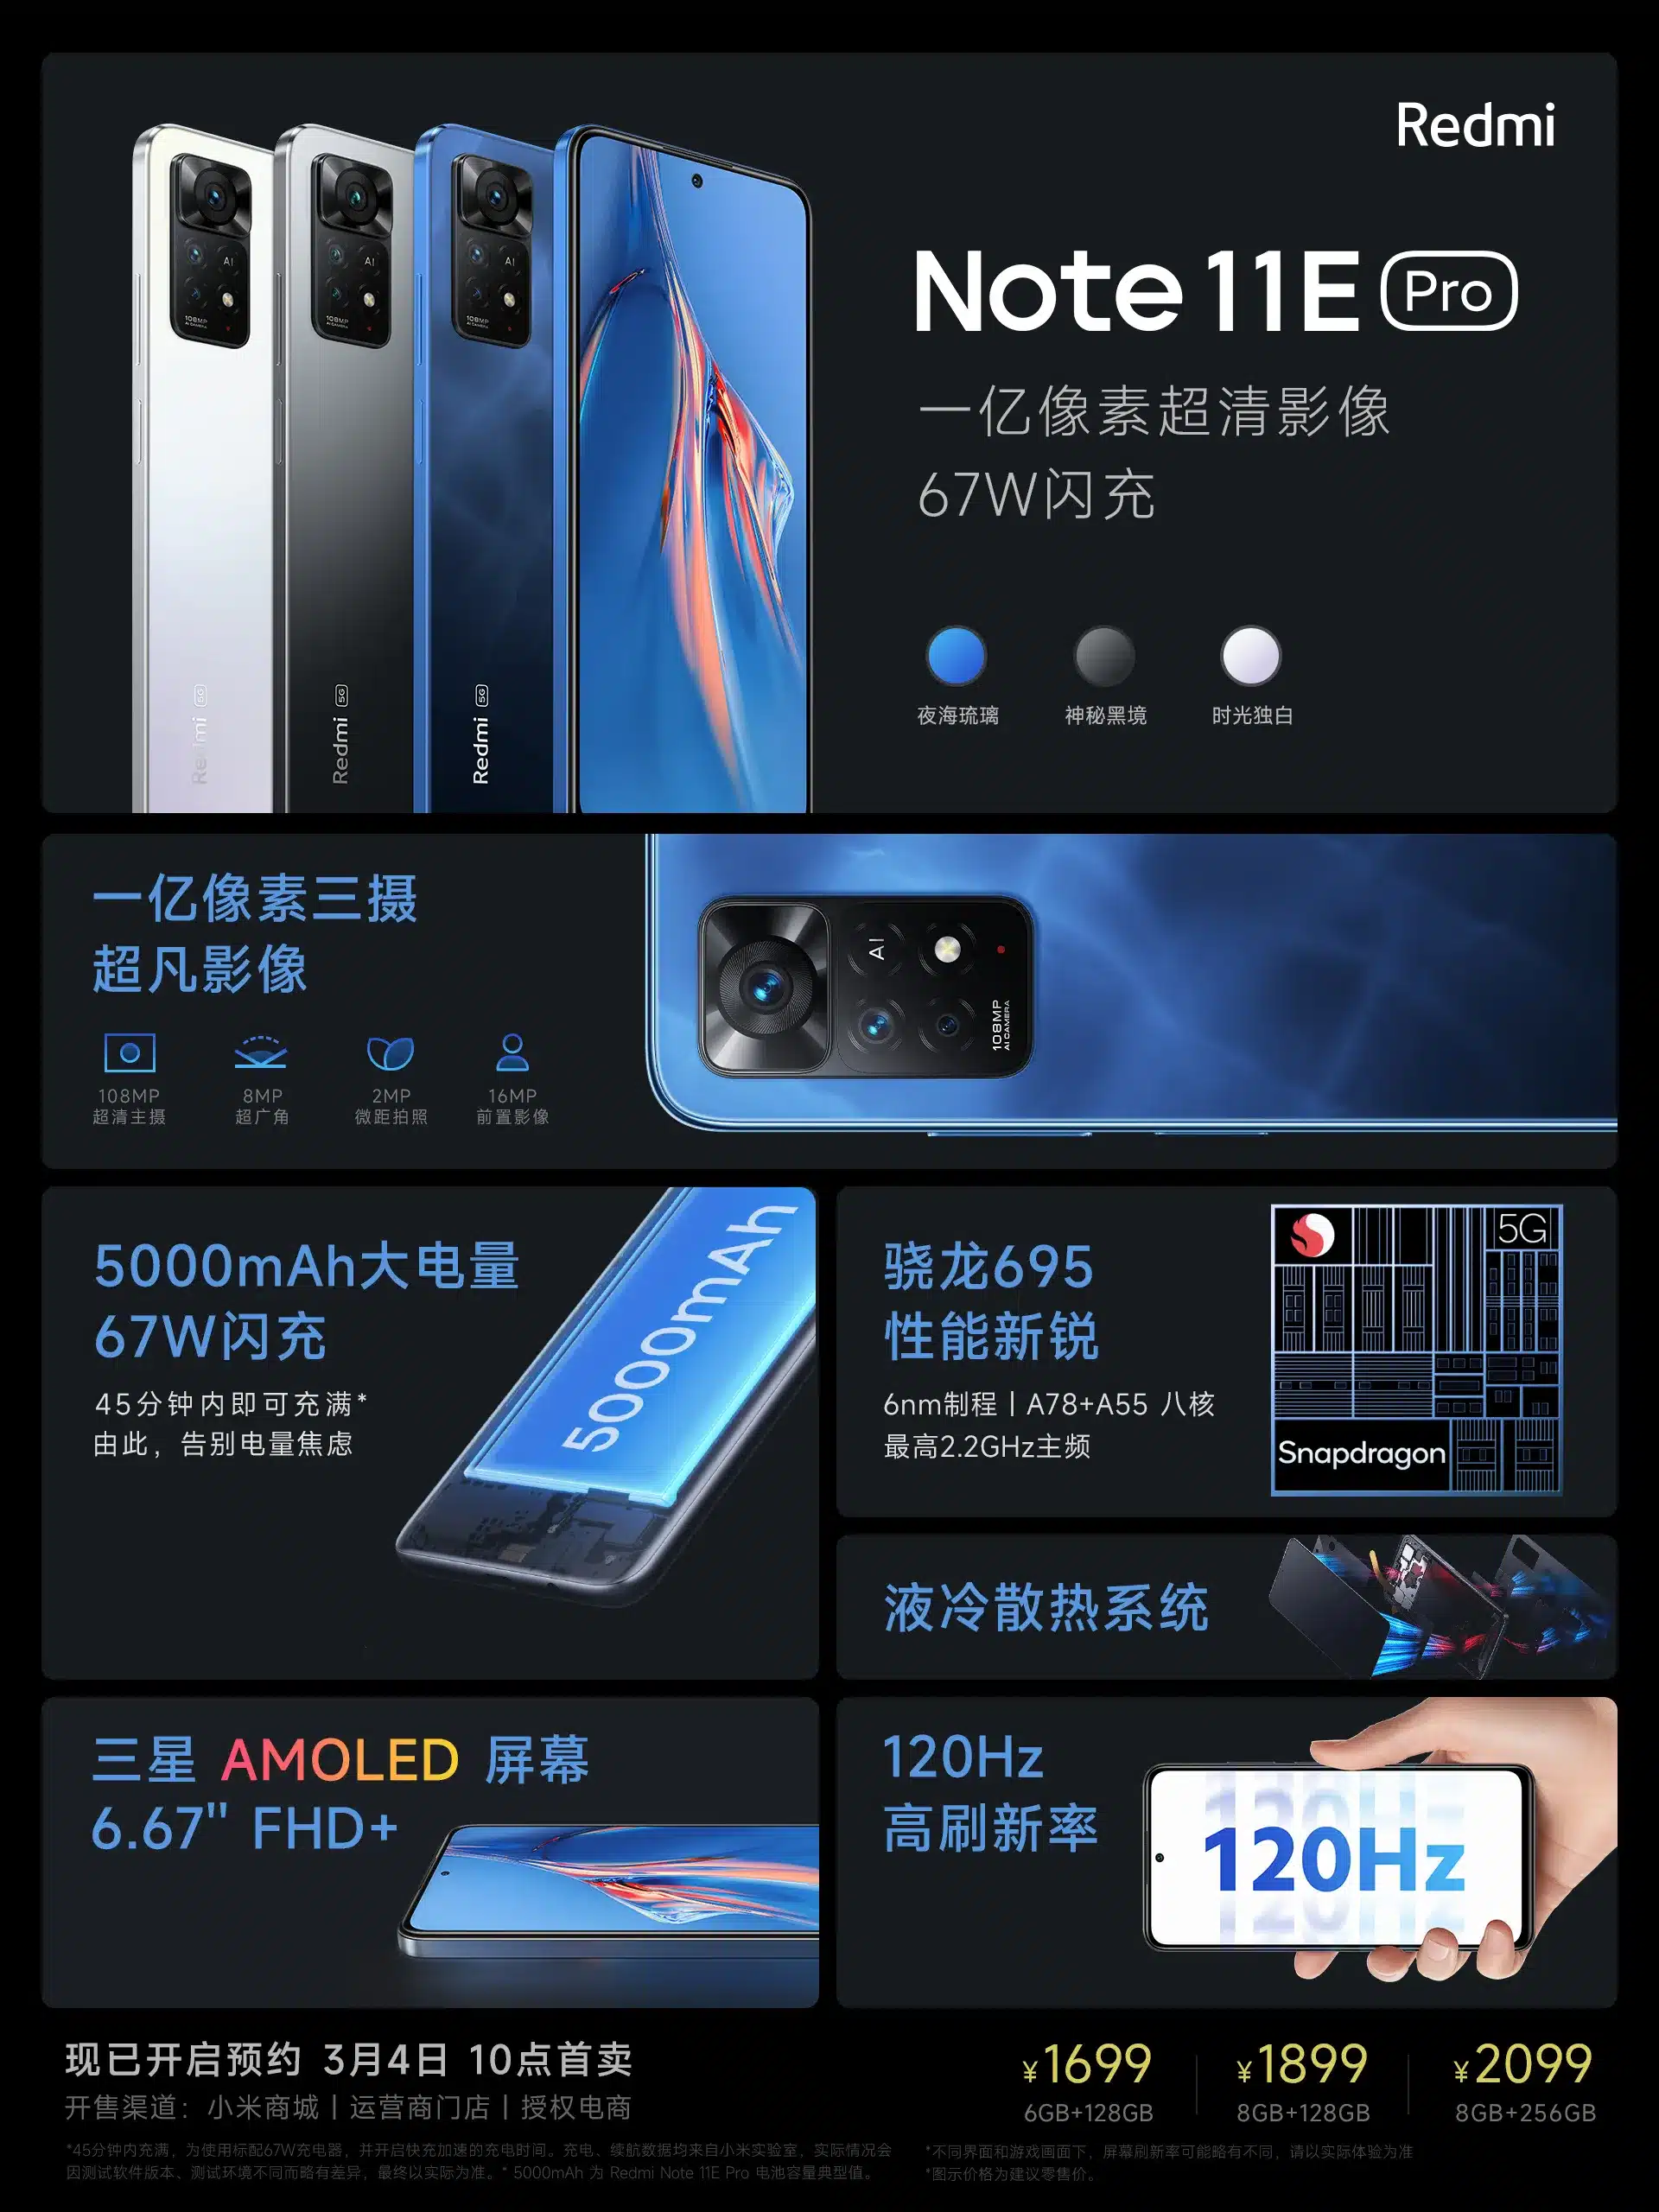 Redmi Note 11E Pro Specifications (Chinese)